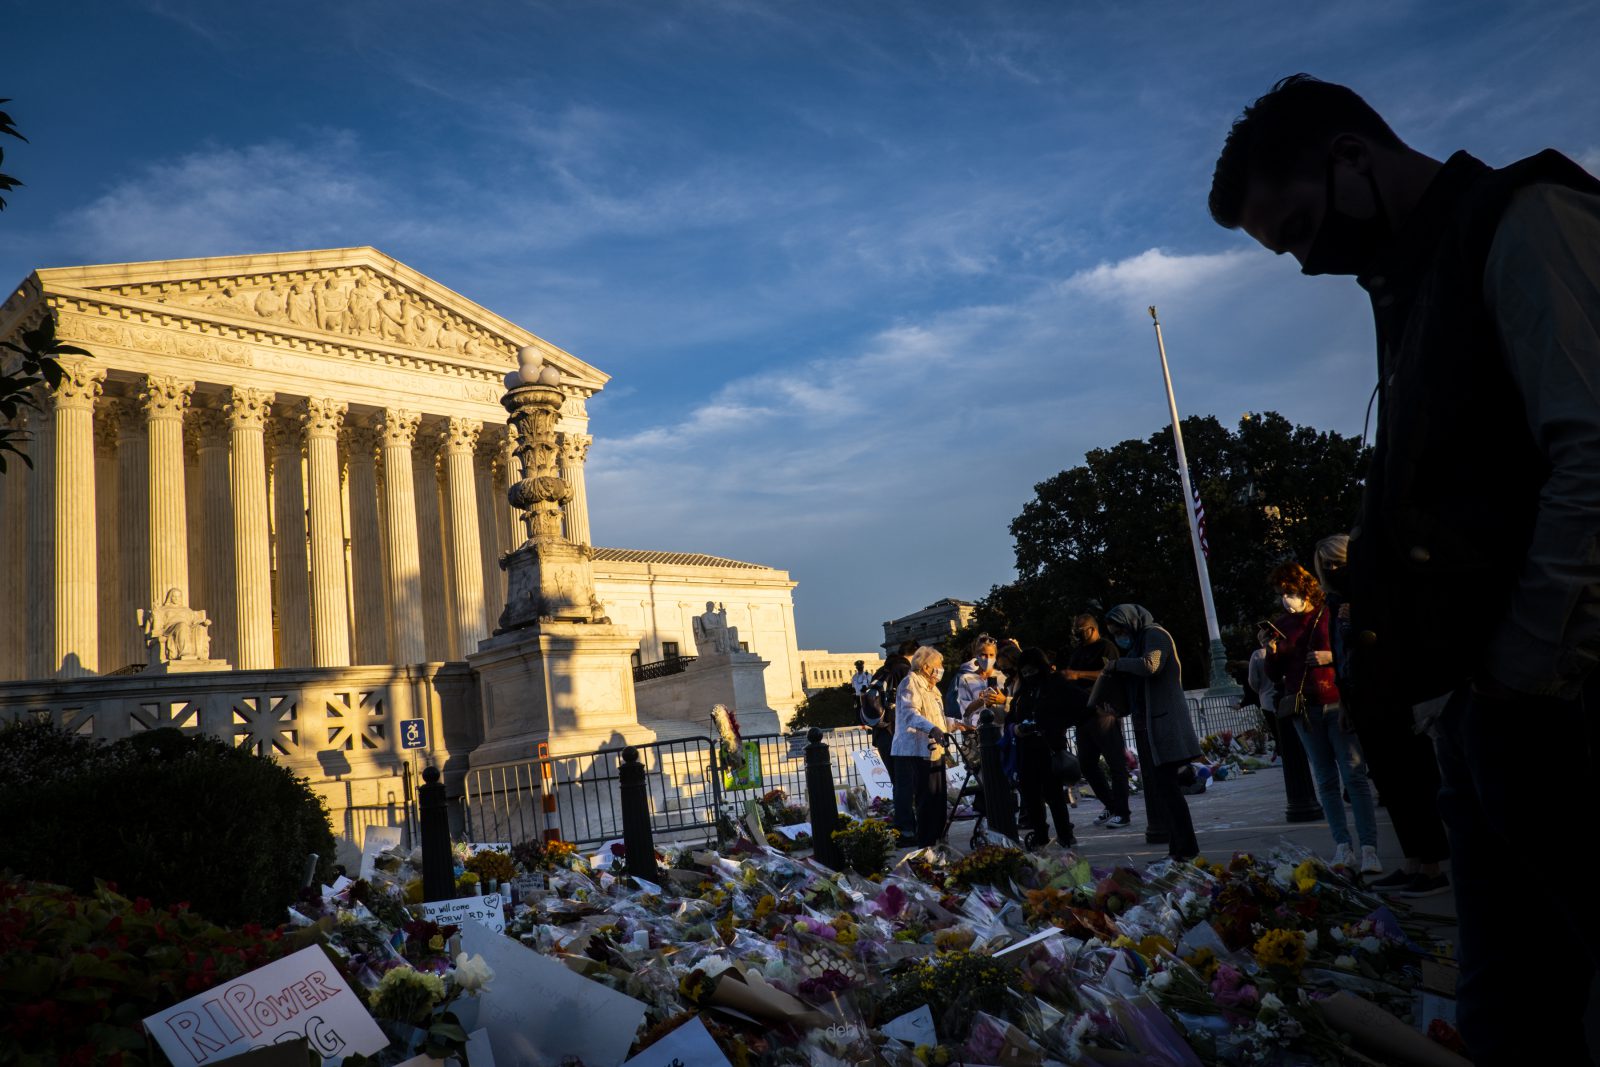 Mourners attend a vigil on Sept. 19, 2020, following the death of U.S. Supreme Court Justice Ruth Bader Ginsburg the night before at the age of 87. (Pete Marovich/American Reportage)